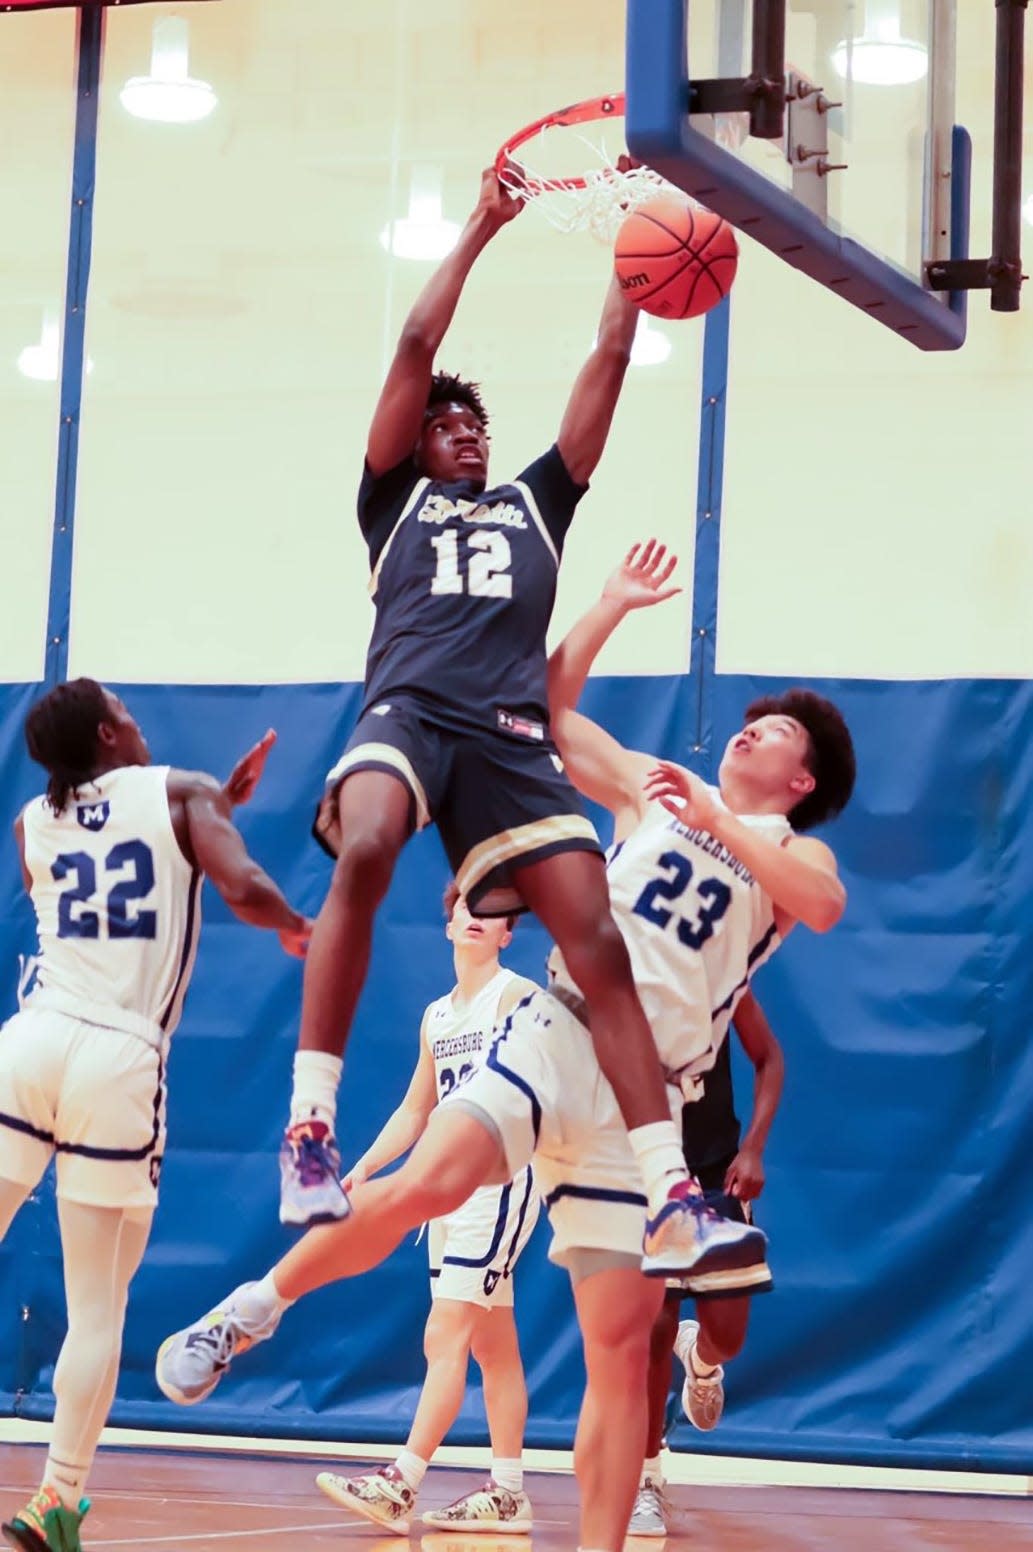 St. Maria Goretti's Najeh Allen dunks for two of his 29 points in a 78-71 victory over host Mercersburg in the Stuff the Basket mixer on Dec. 3, 2022.